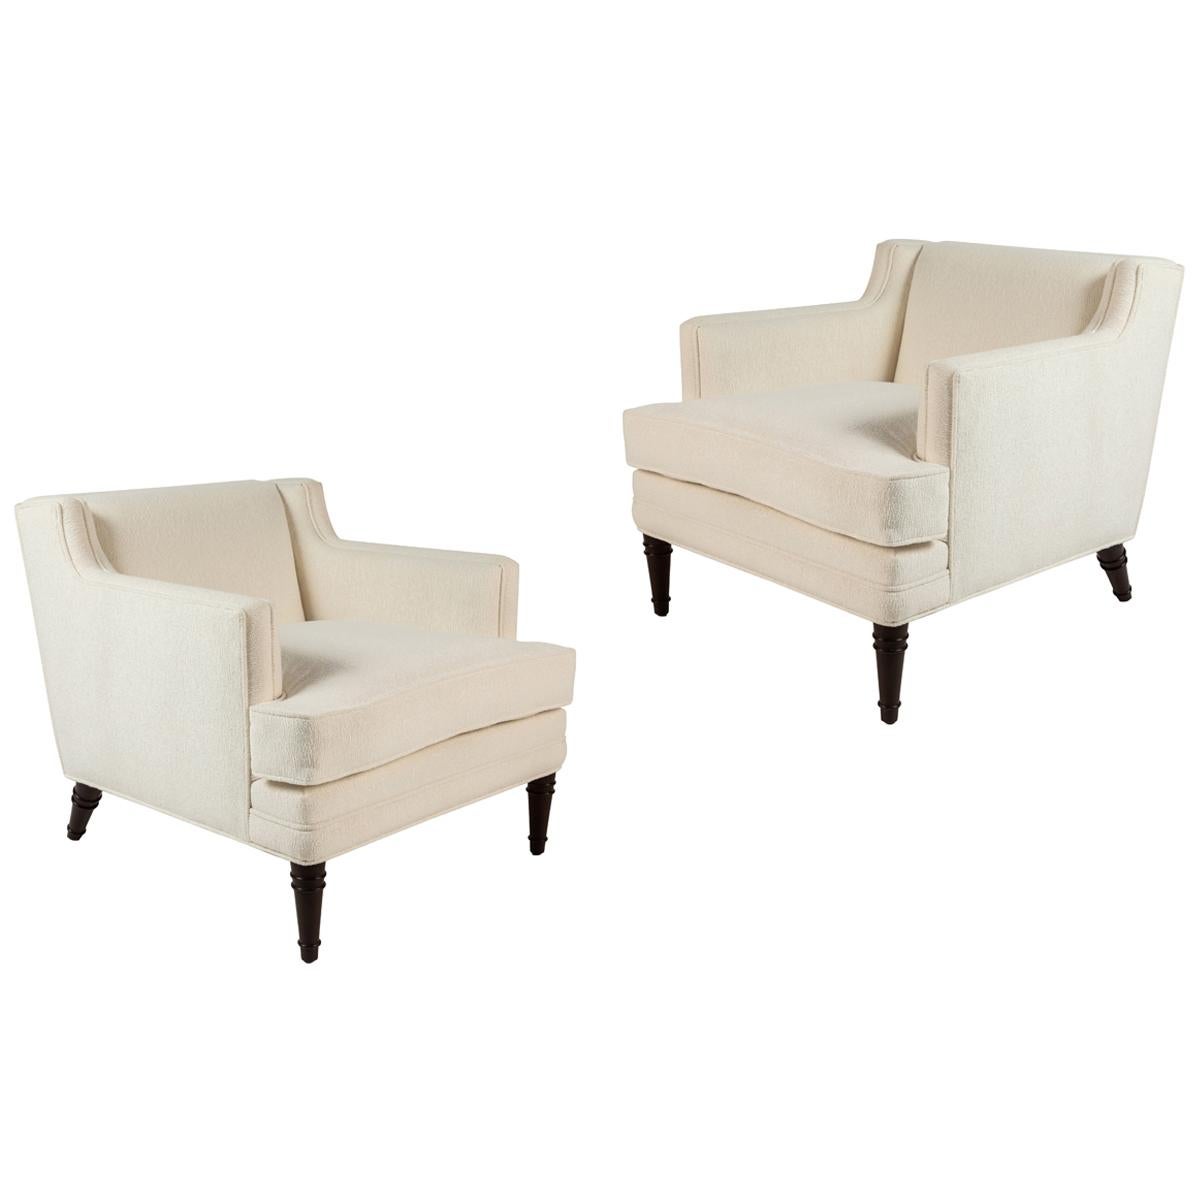 Pair of Upholstered Club Chairs by Willam "Billy" Haines